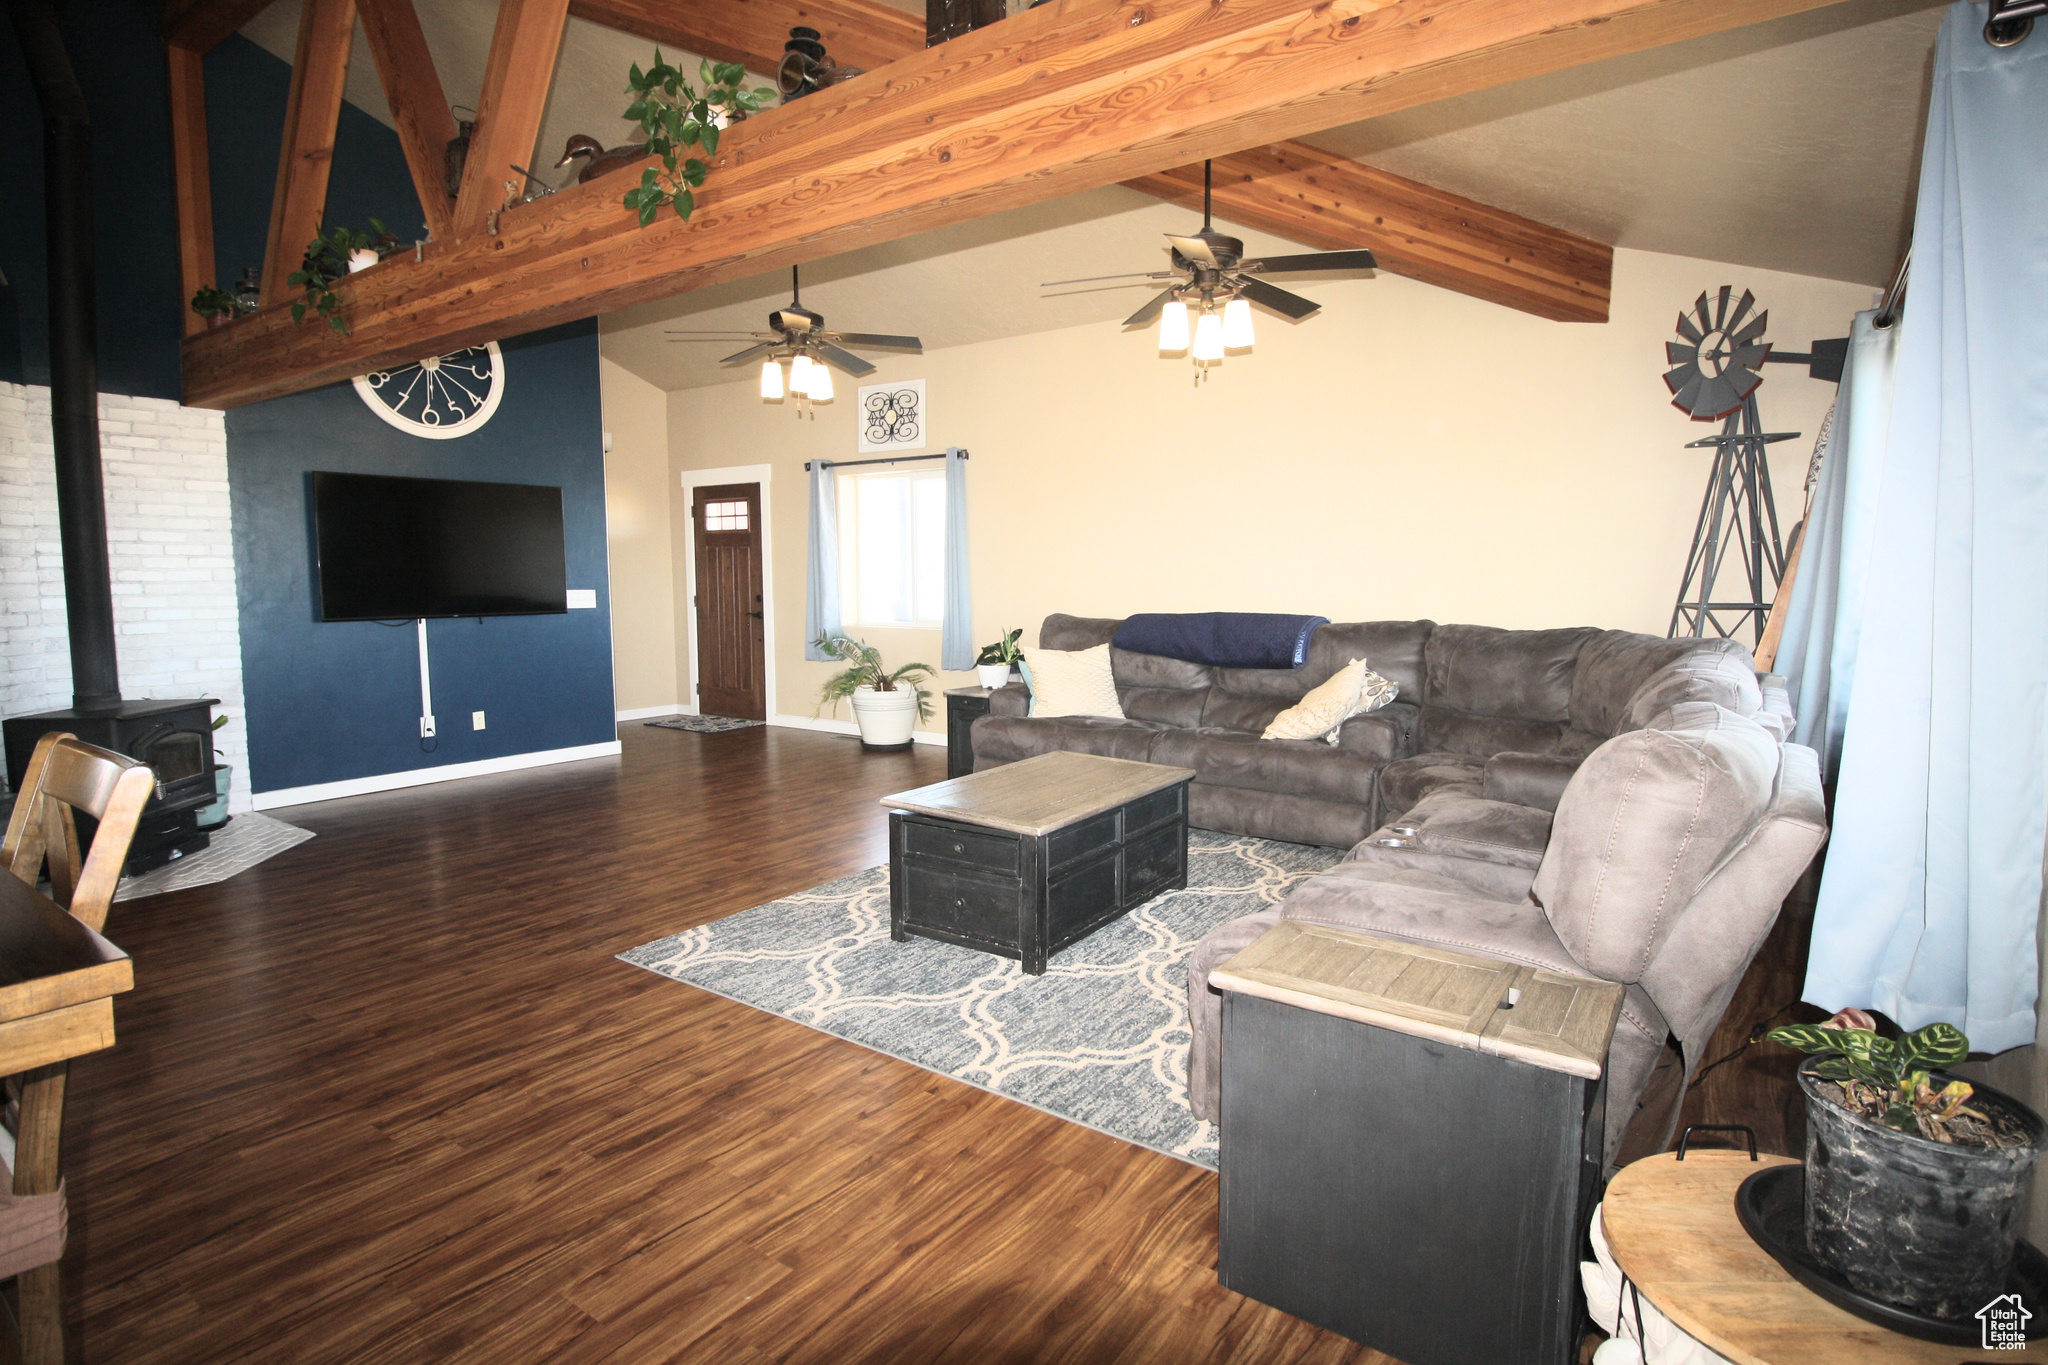 Living room with dark hardwood / wood-style flooring, a high ceiling, a wood stove, beam ceiling, and ceiling fan